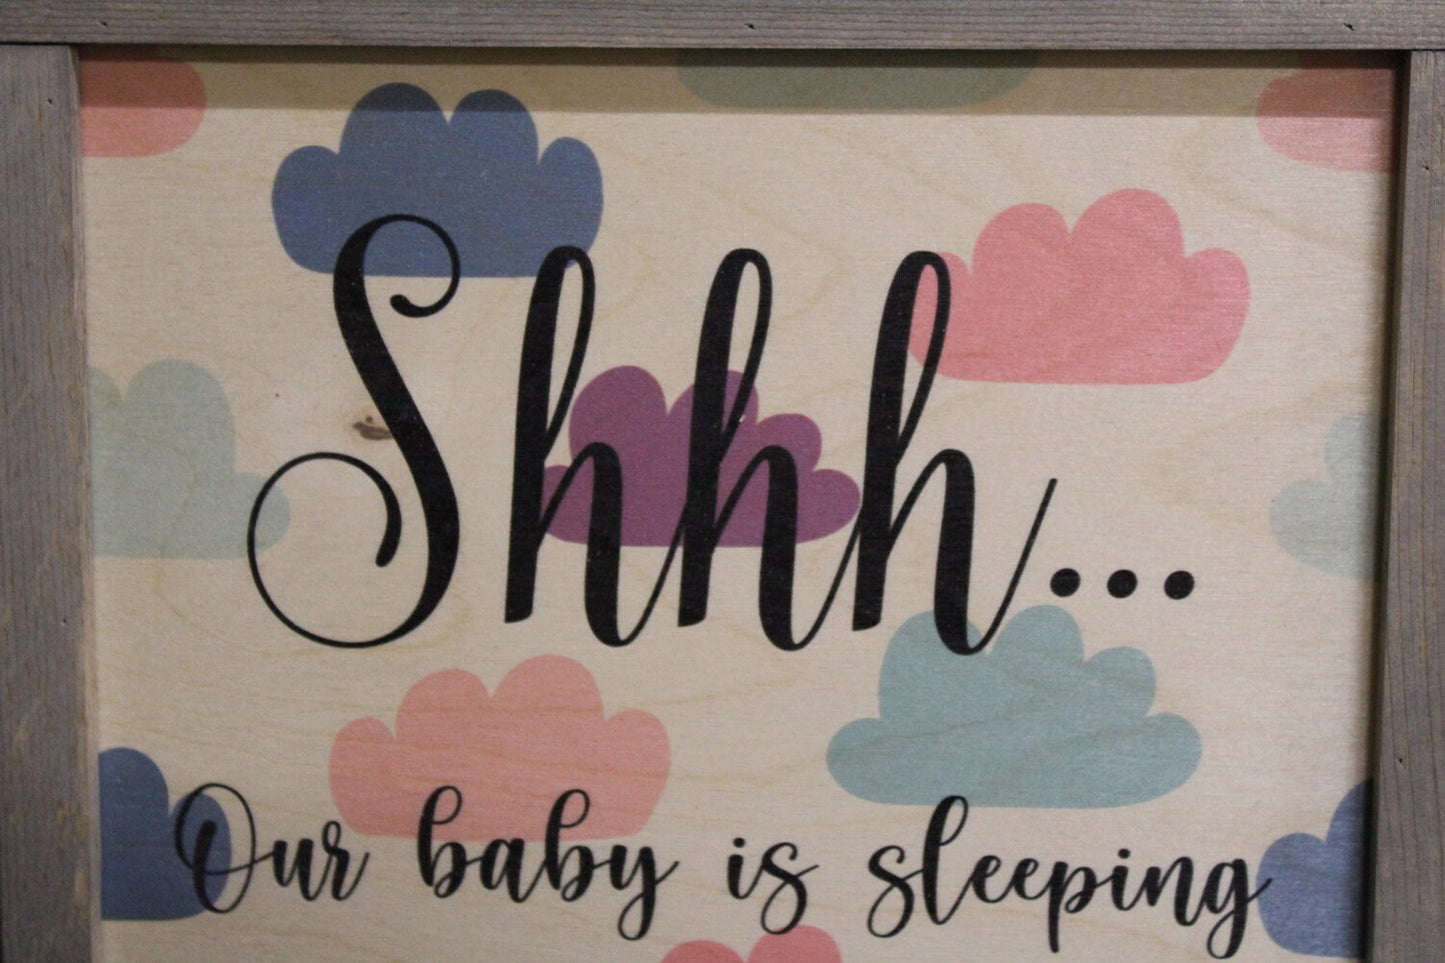 Clouds Nursery Sign Shhh Baby Is Sleeping Framed Wood Pastel Please Do Not Disturb Do Not Knock Ring Bell Wall Art Rustic Decoration Decor